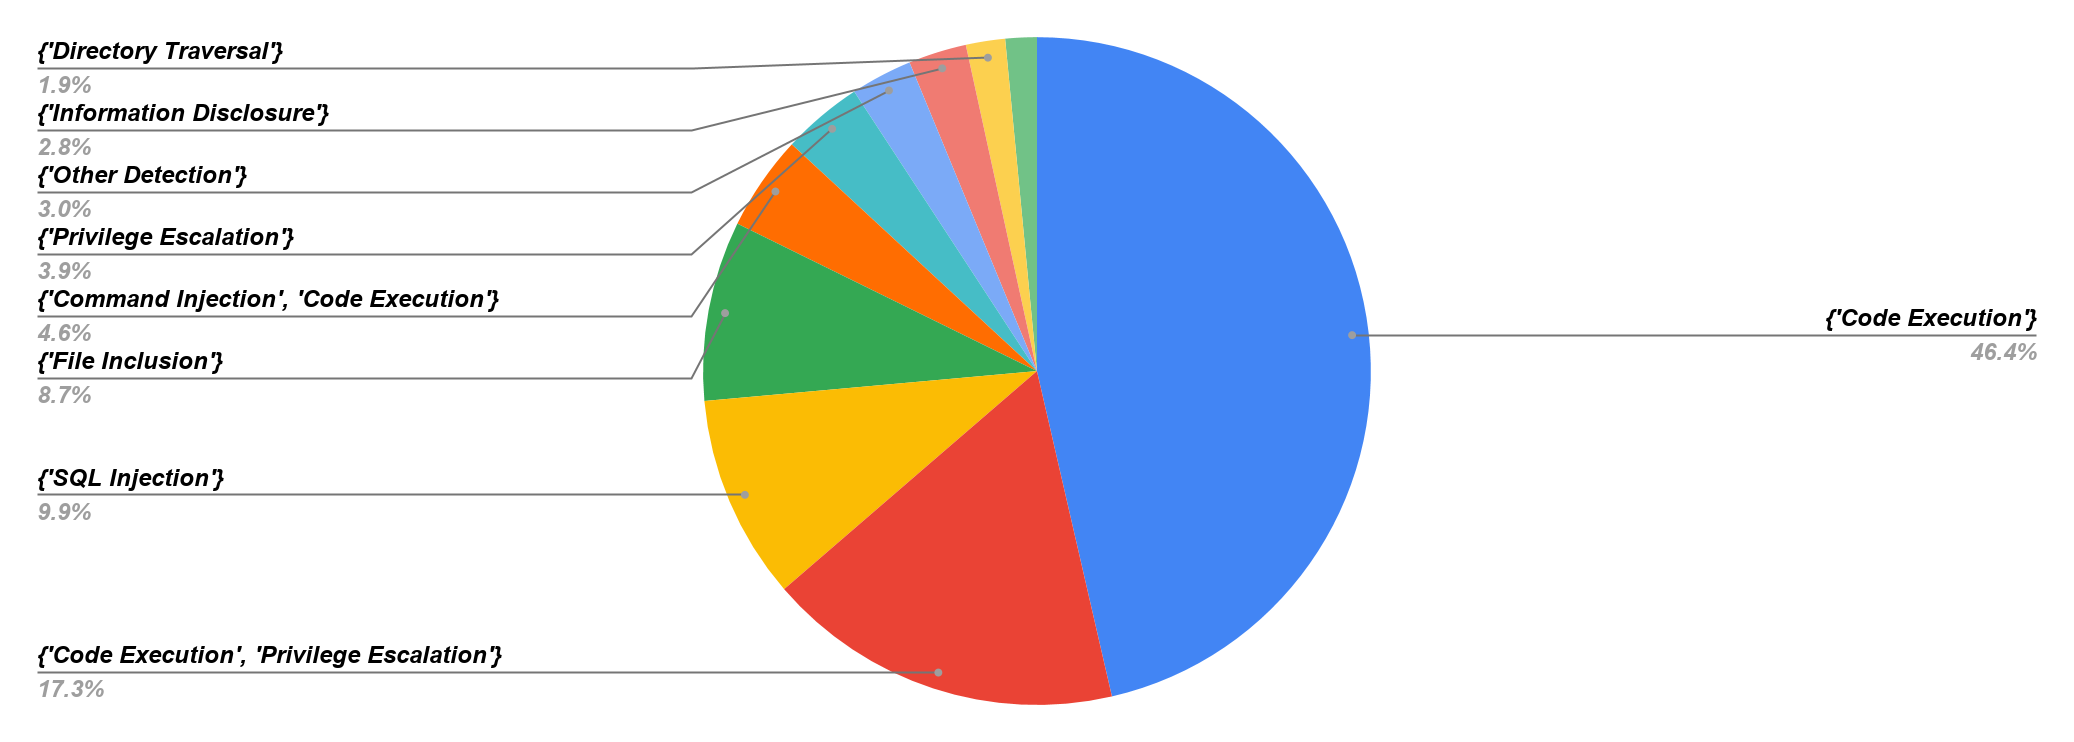 The image depicts a bar chart that summaries the session-based attack category distribution. Code execution is the largest slice, accounting for 46.4%